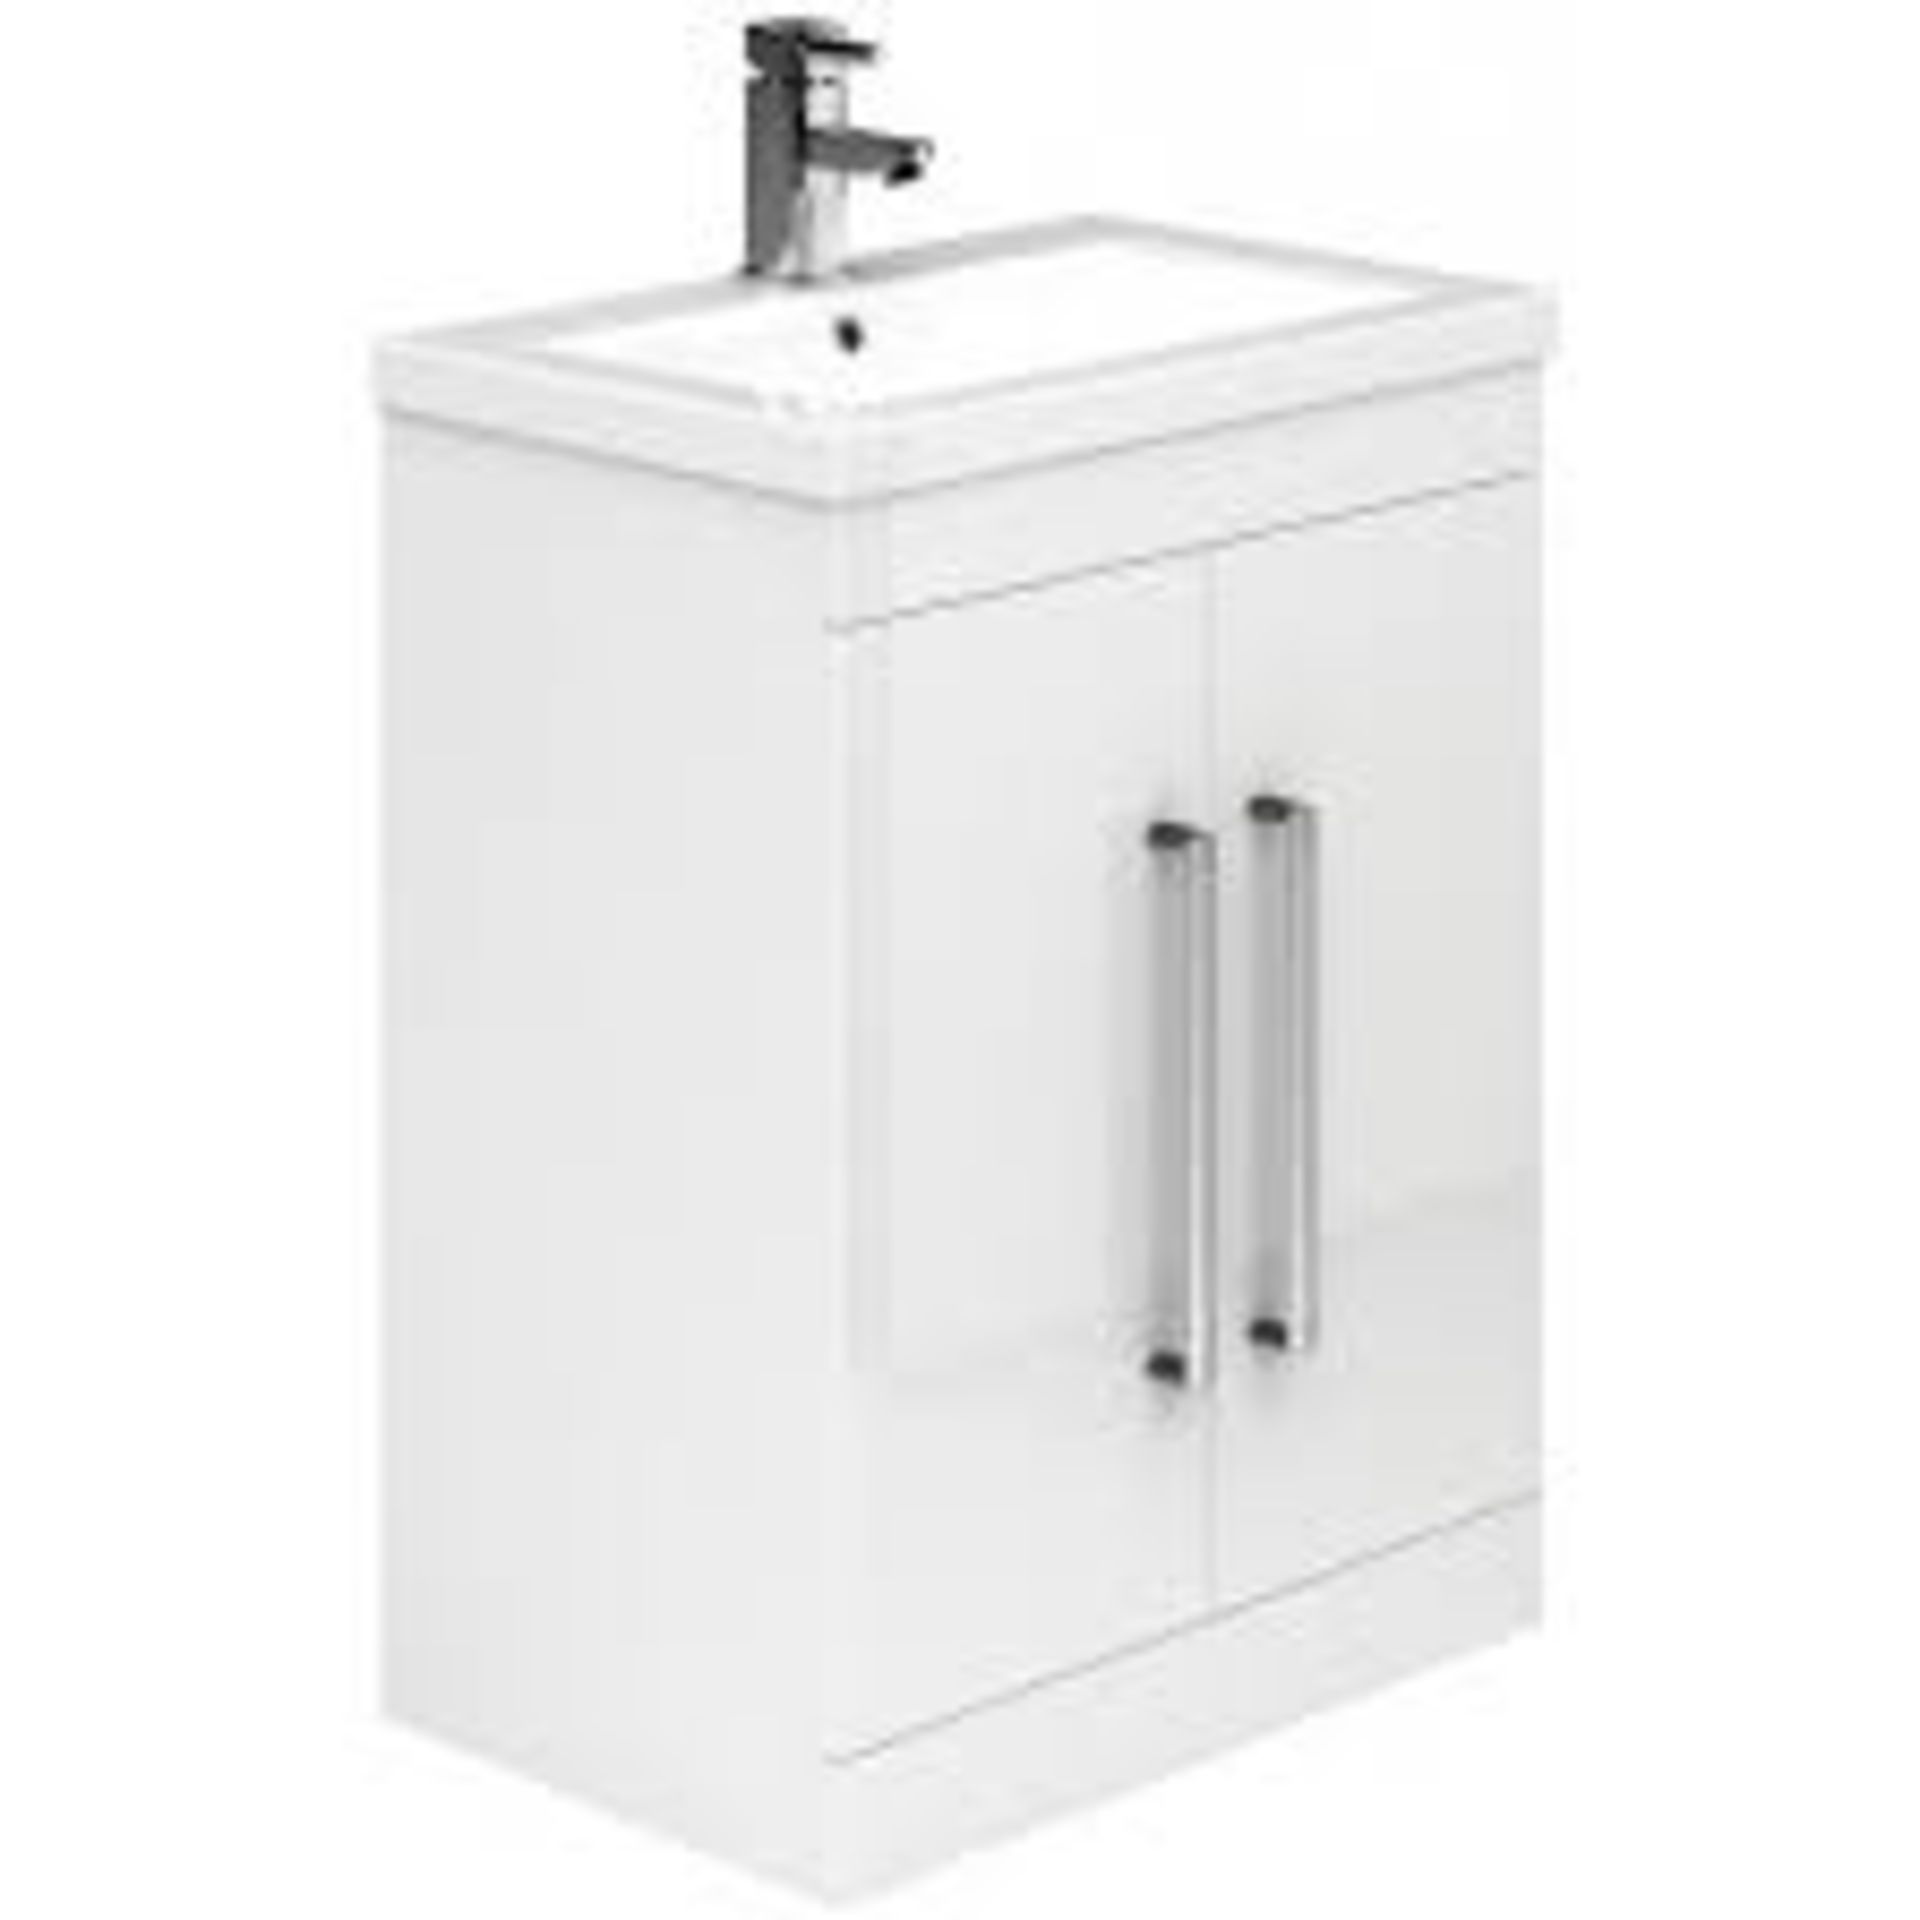 Nala 515 White Ceramic Basin RRP £130 (15998) (Public Viewing and Appraisals Available)